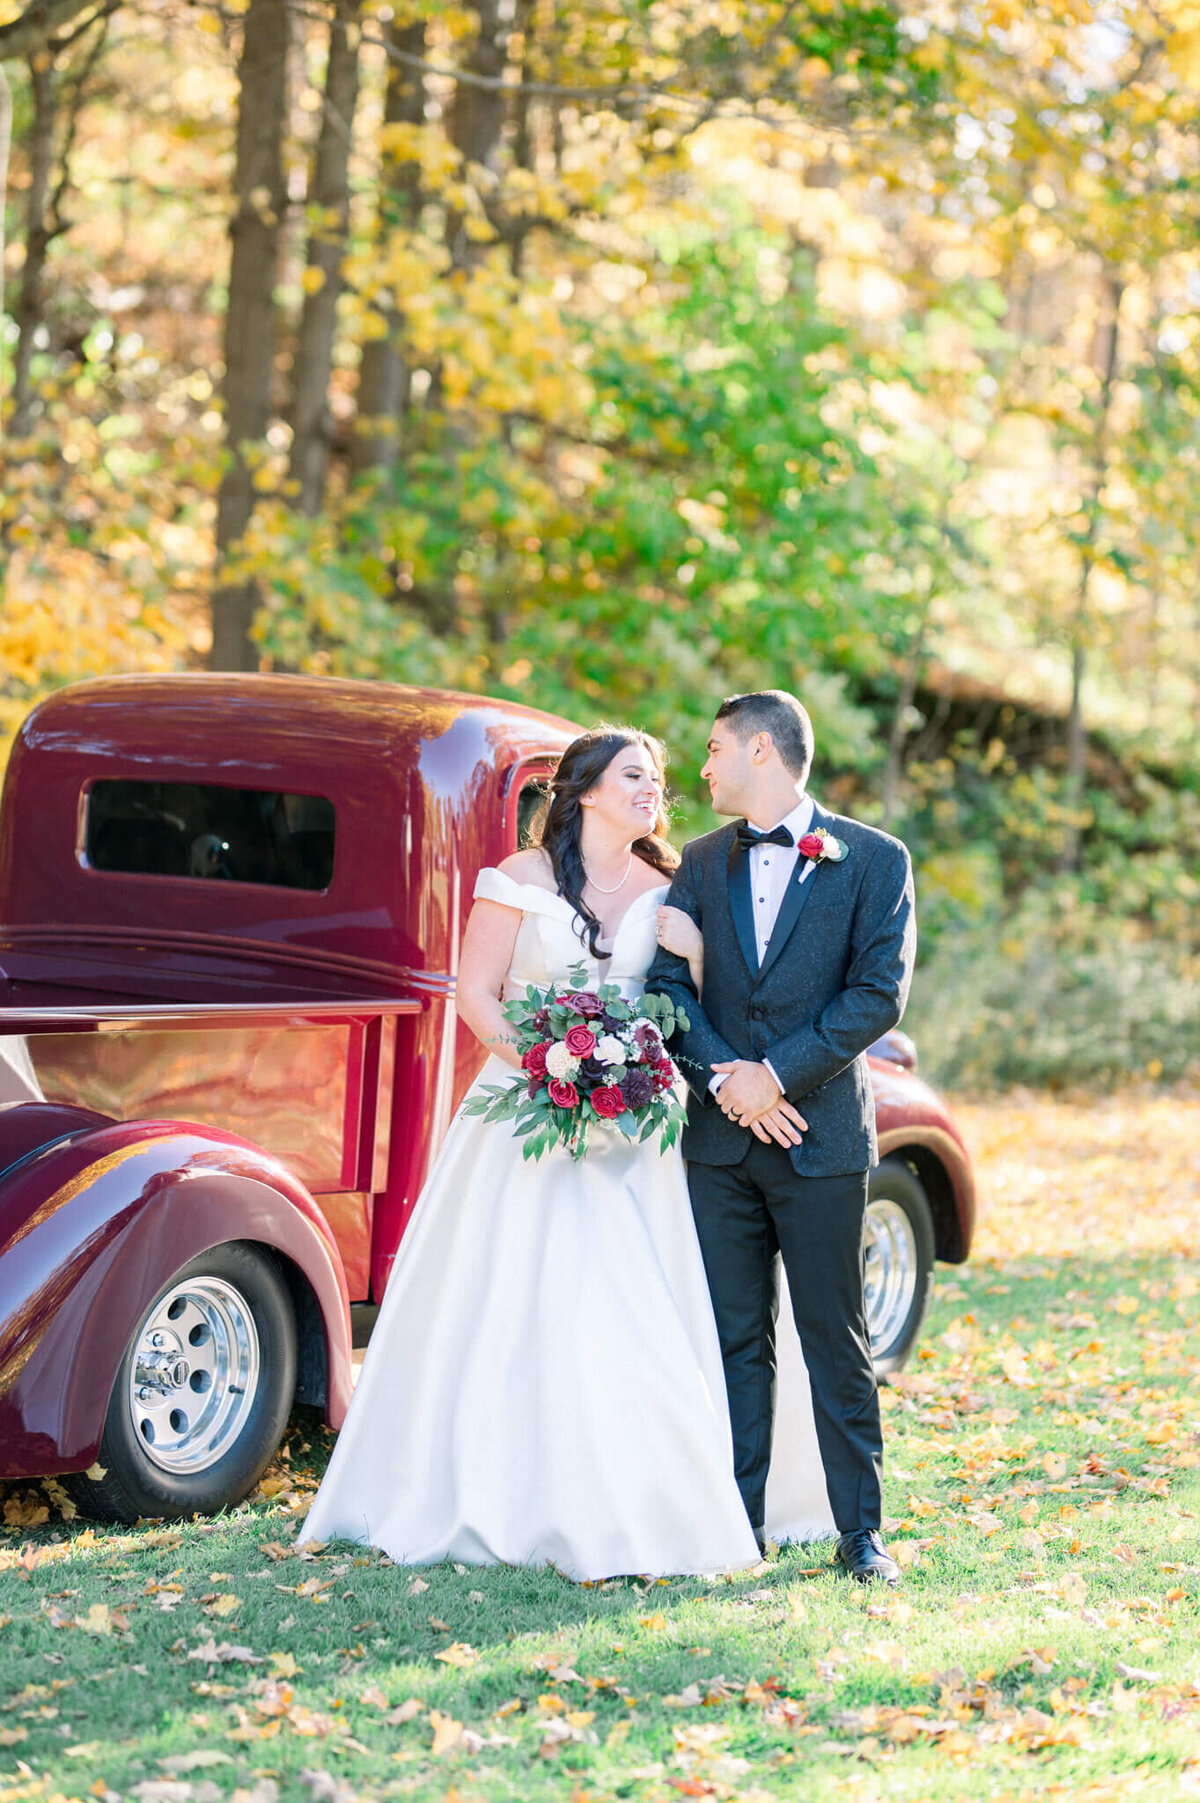 Bride and groom wedding portrait in Toronto with vintage red truck